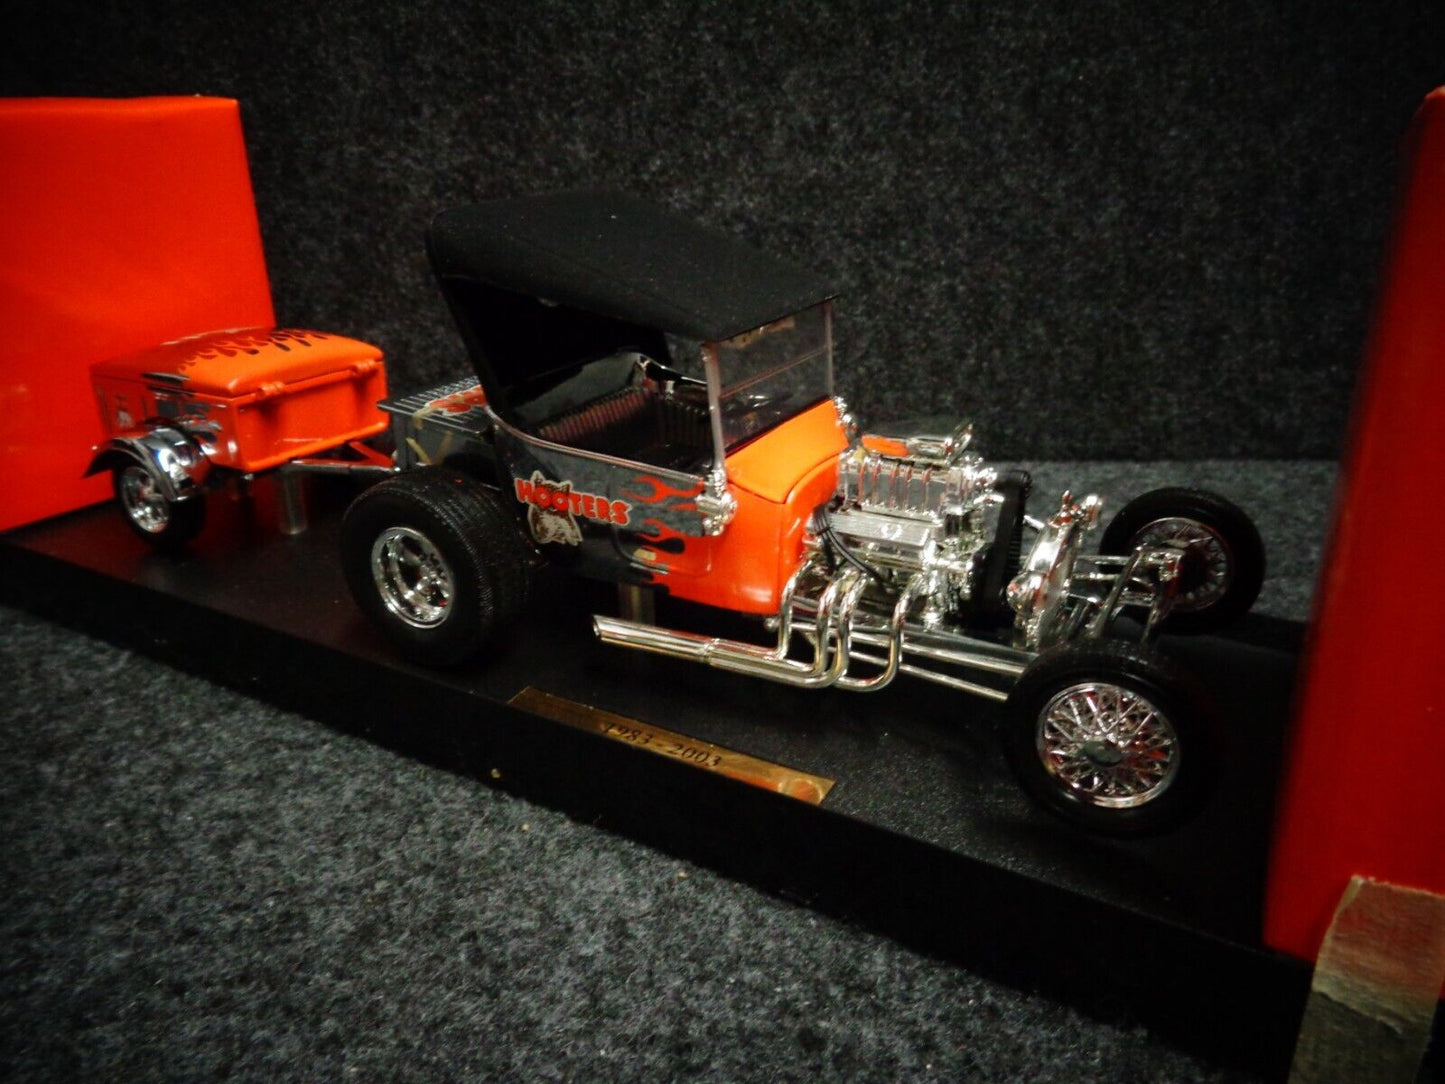 Hooters Ford Model T 'T-Bucket' Hot Rod & Trailer